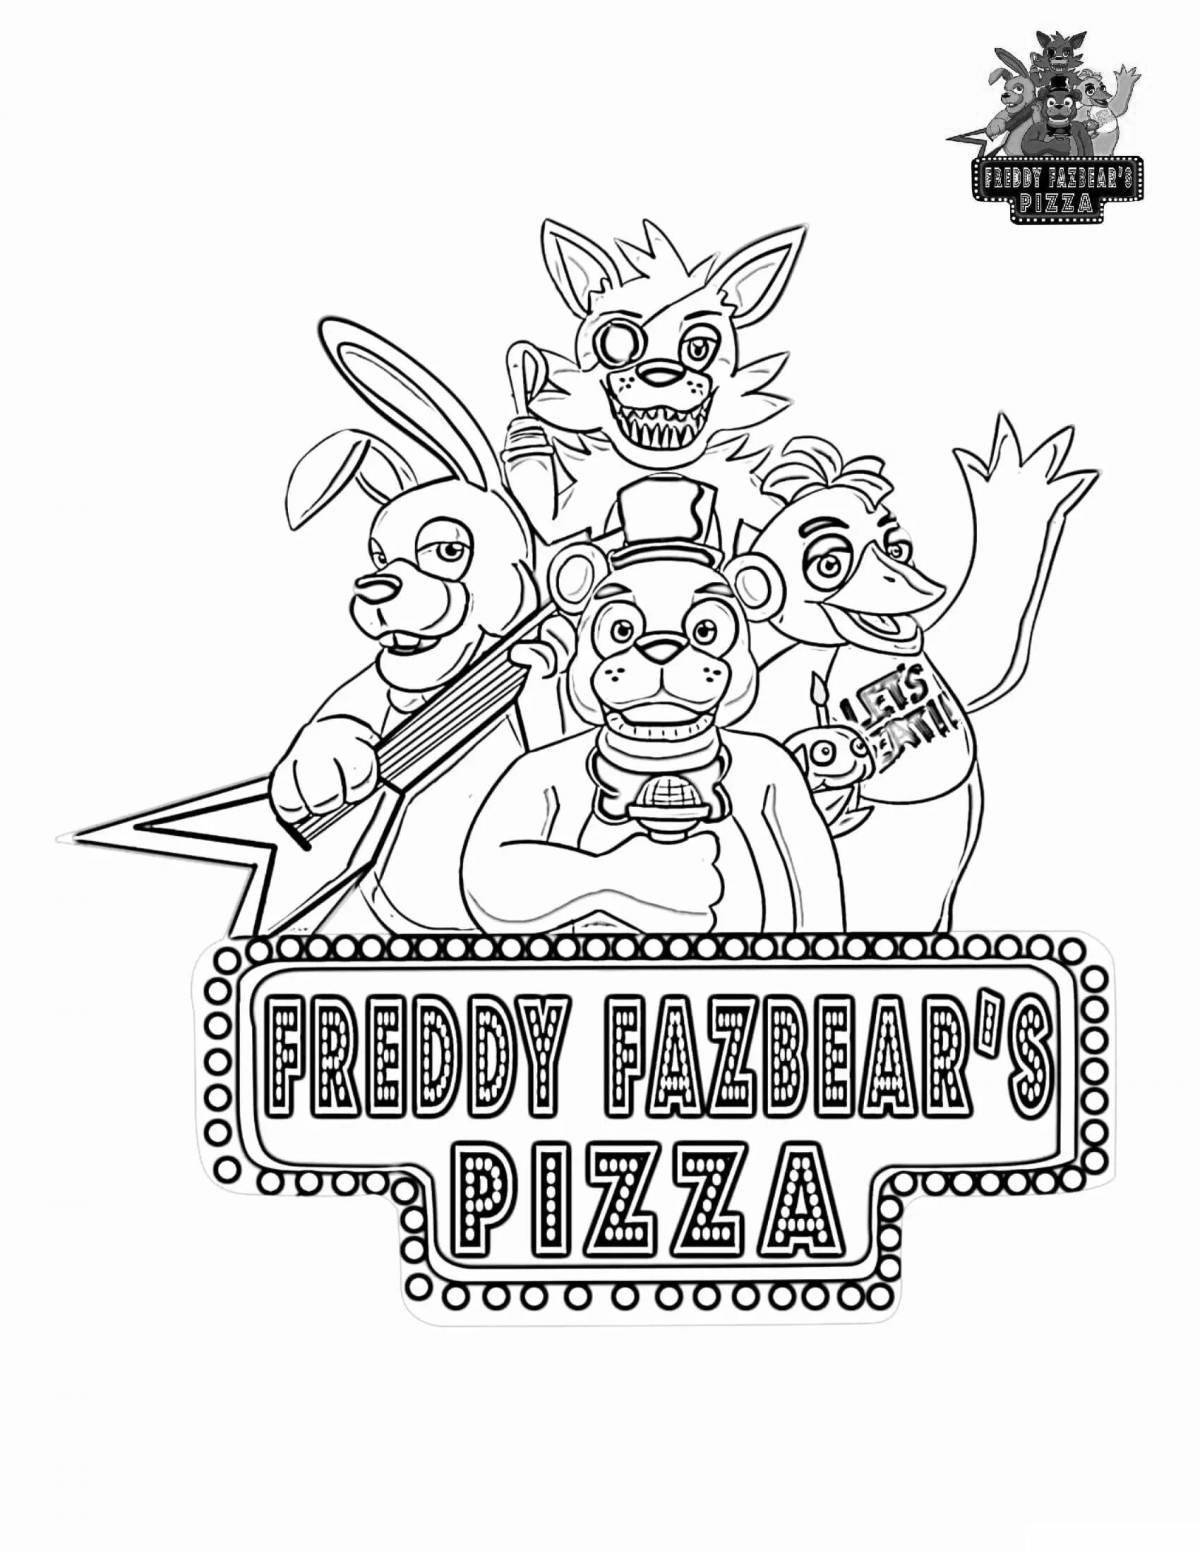 Fnaf world witty coloring book